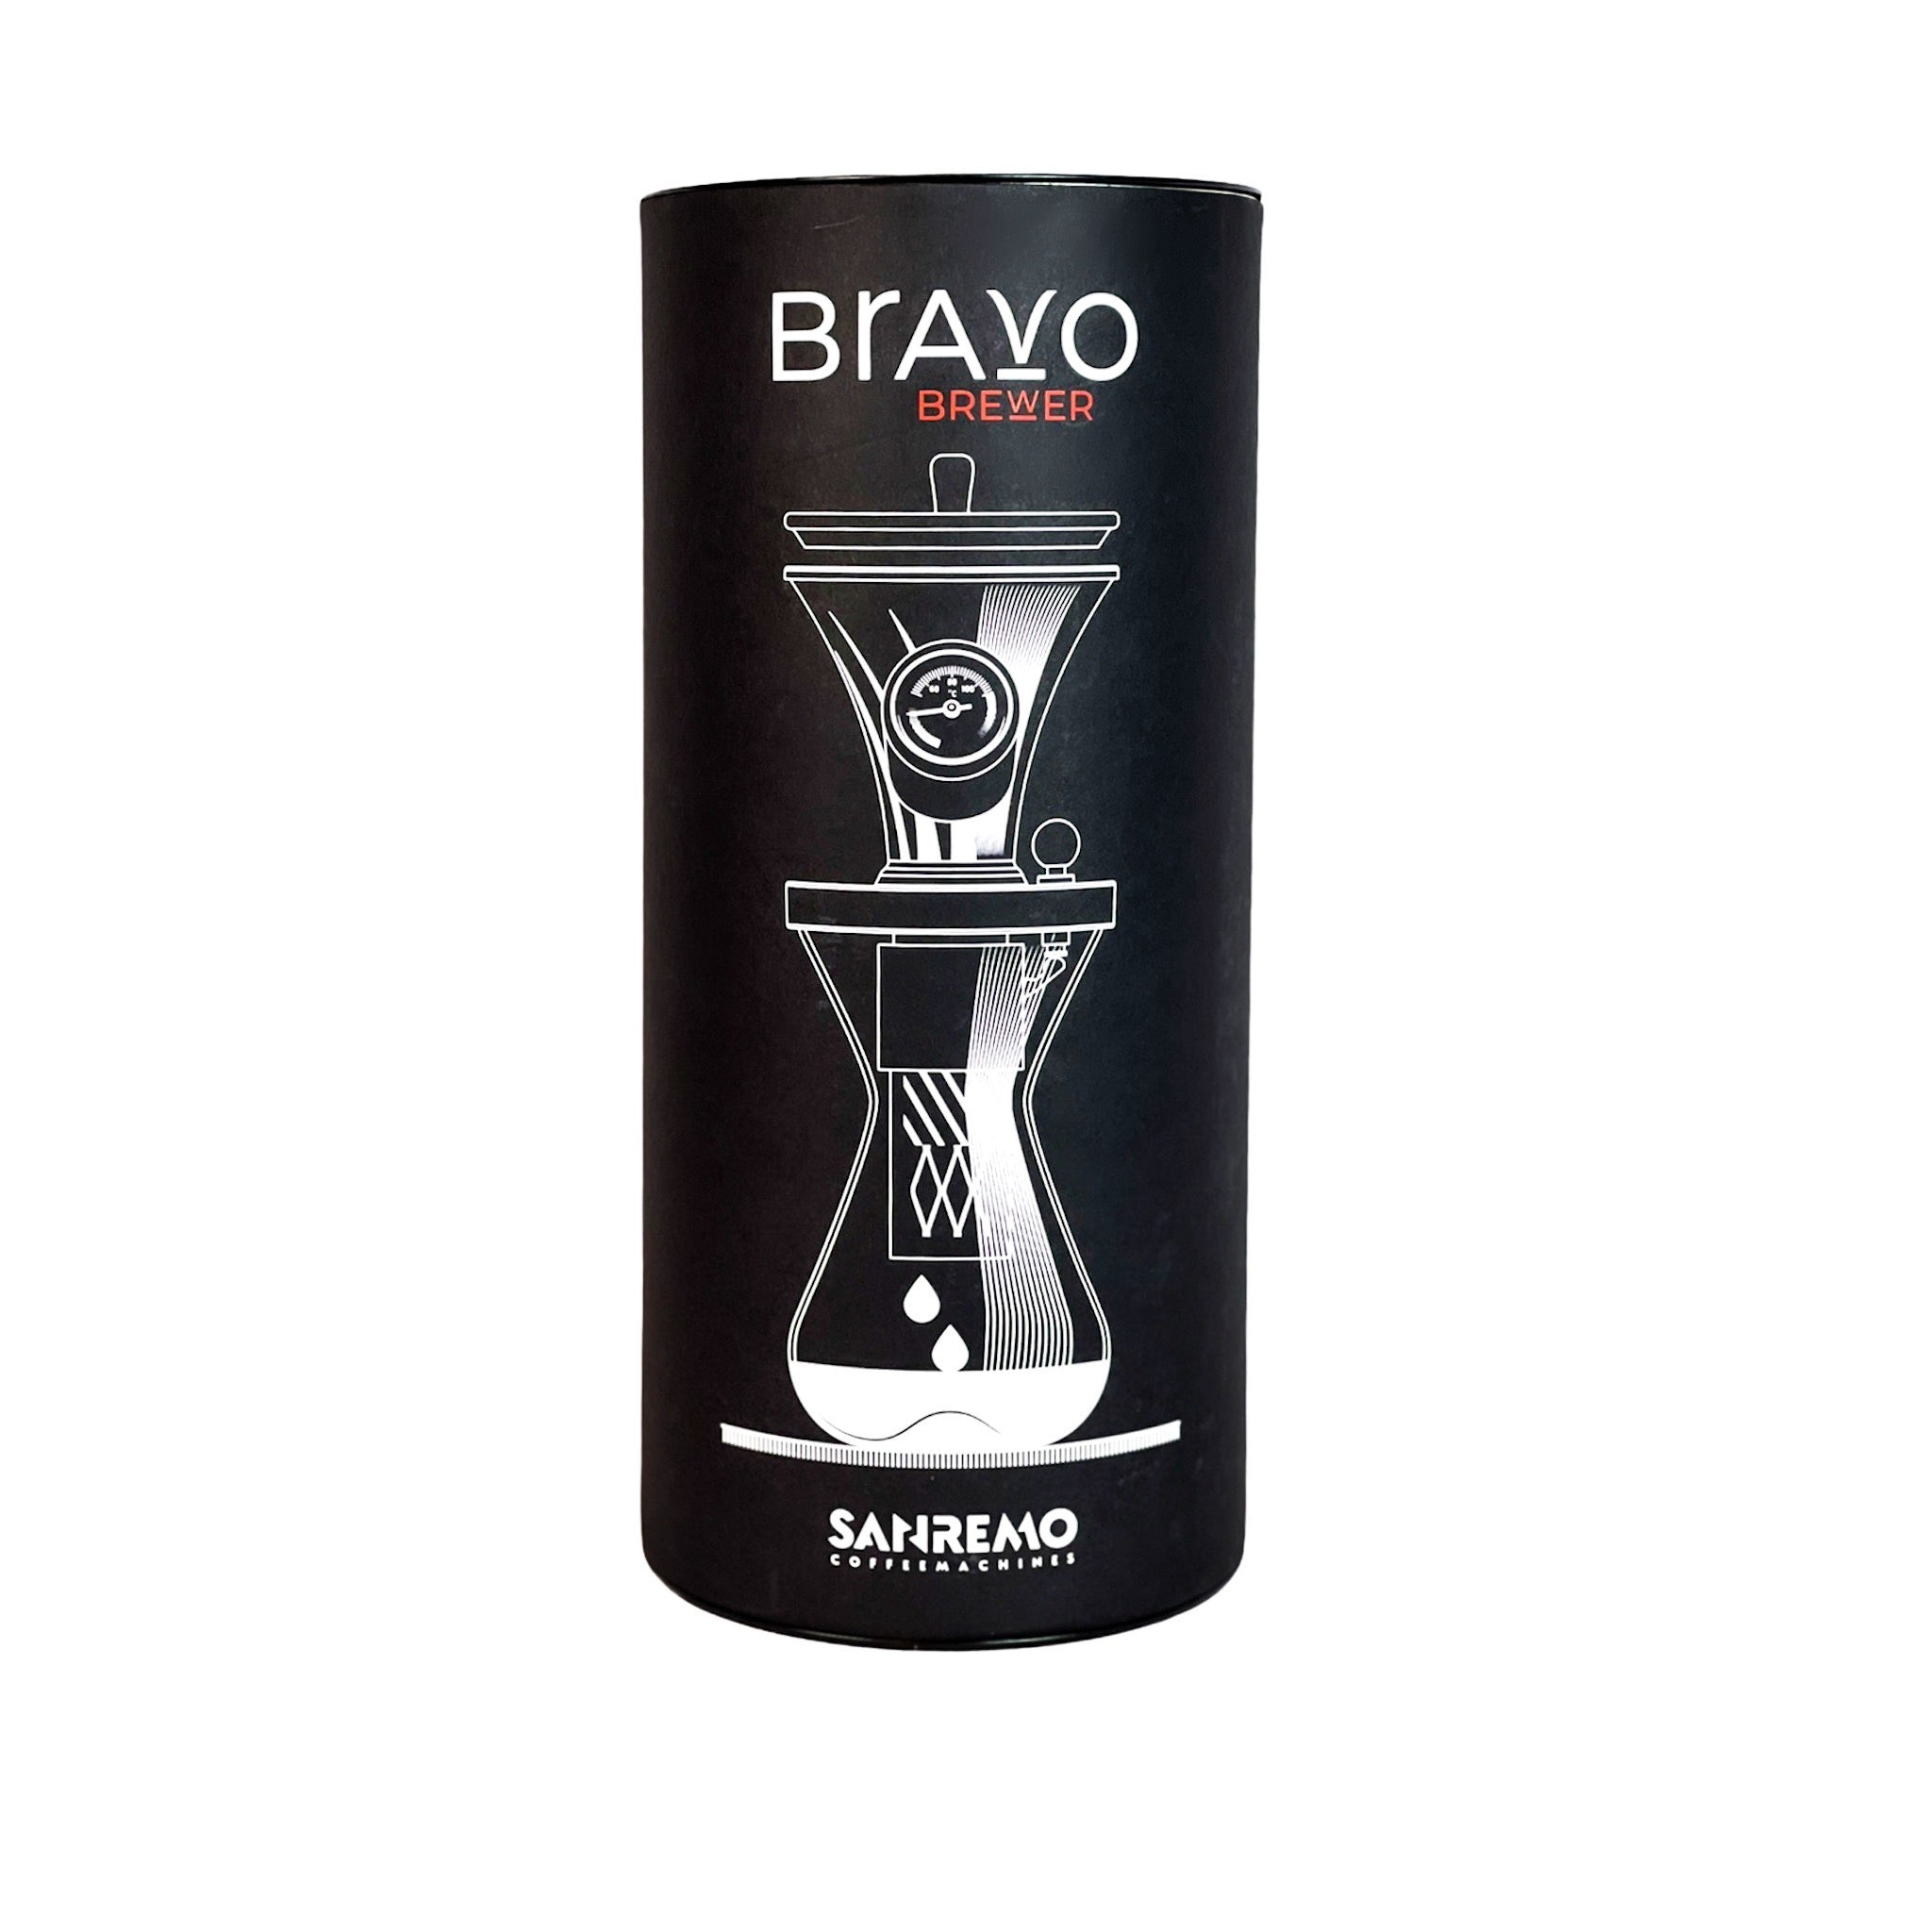 Bravo Brewer, new best brewer, made in Italy